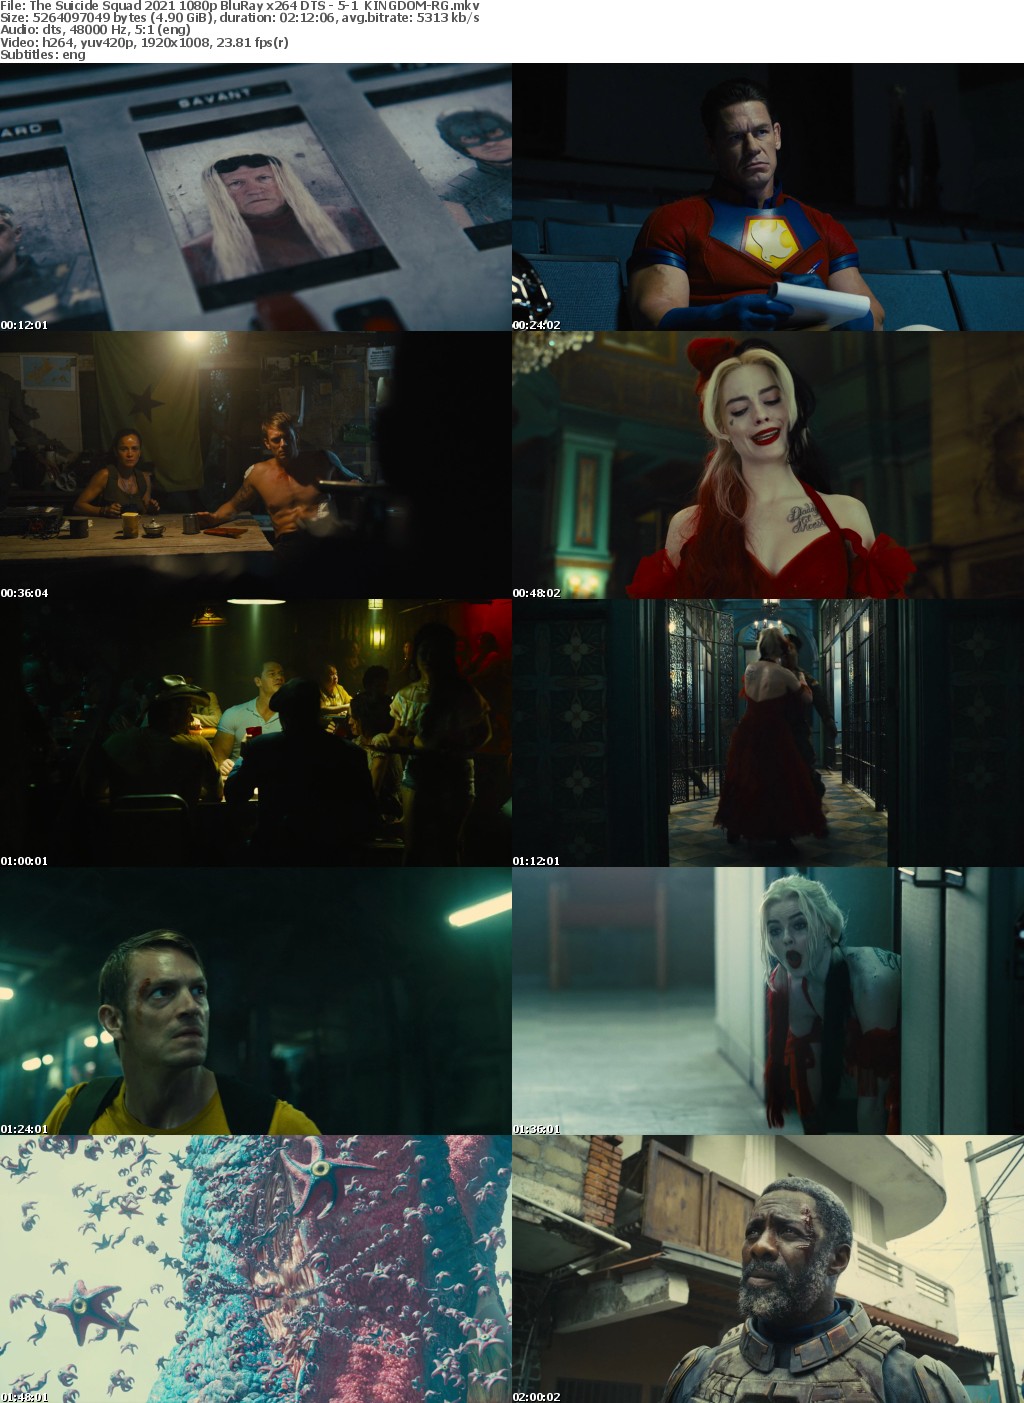 The Suicide Squad 2021 1080p BluRay x264 DTS - 5-1 KINGDOM-RG